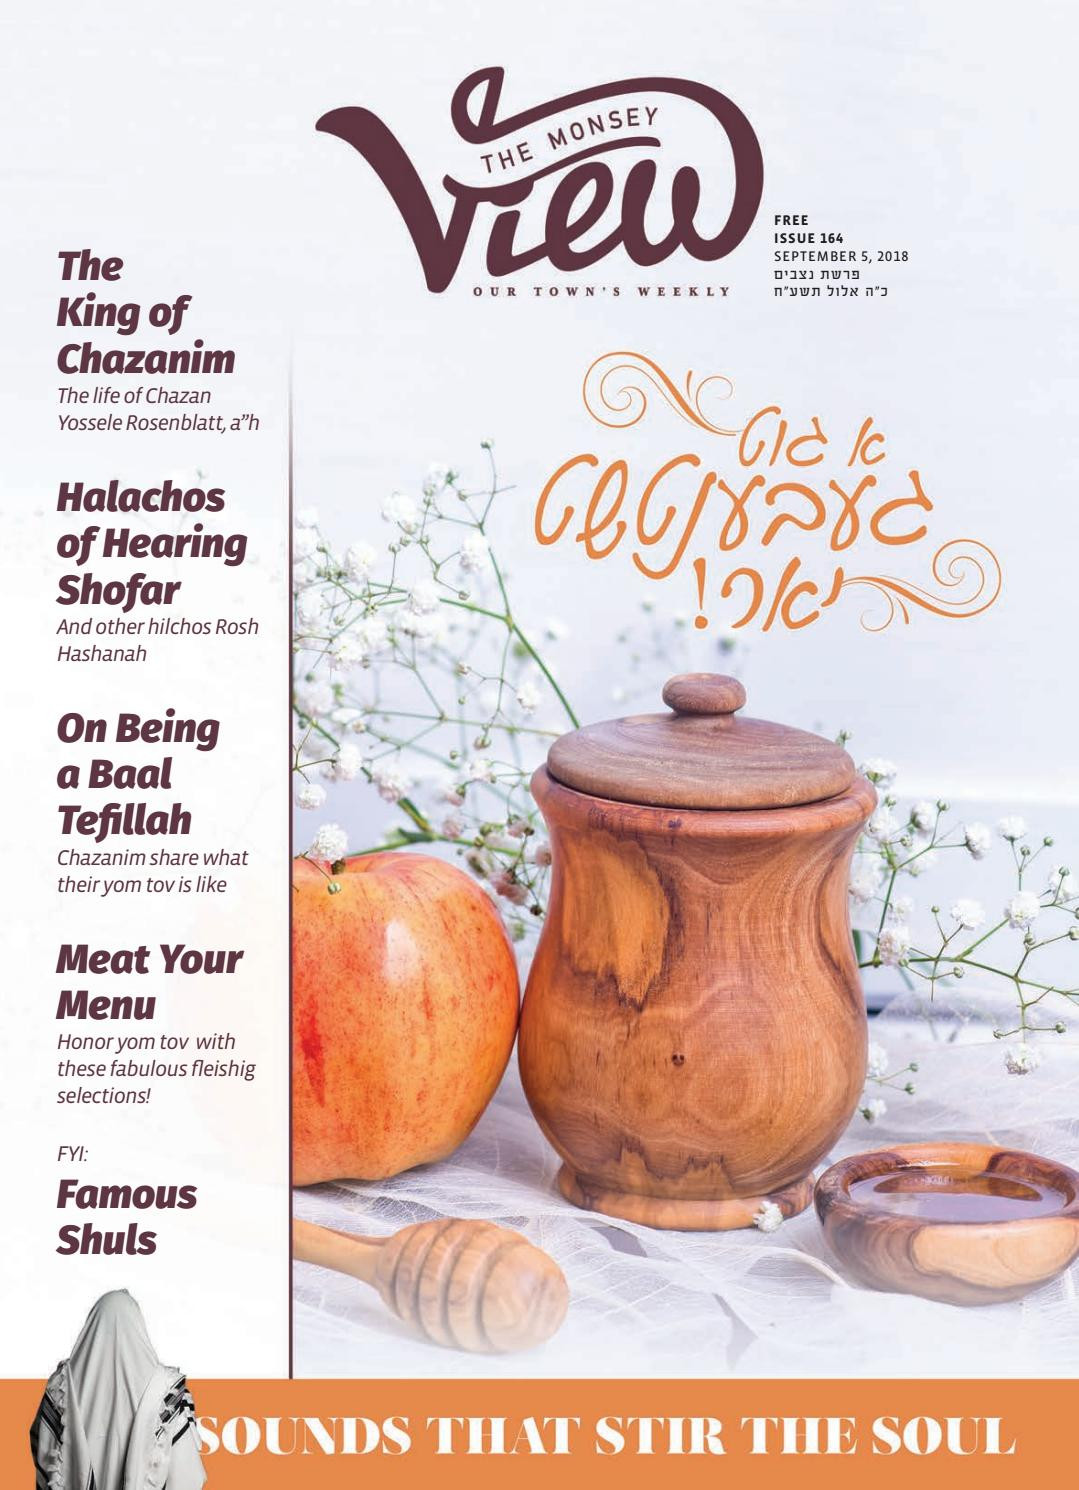 Eo Brody Green Vase Of issue 164 by the Monsey View issuu Inside Page 1